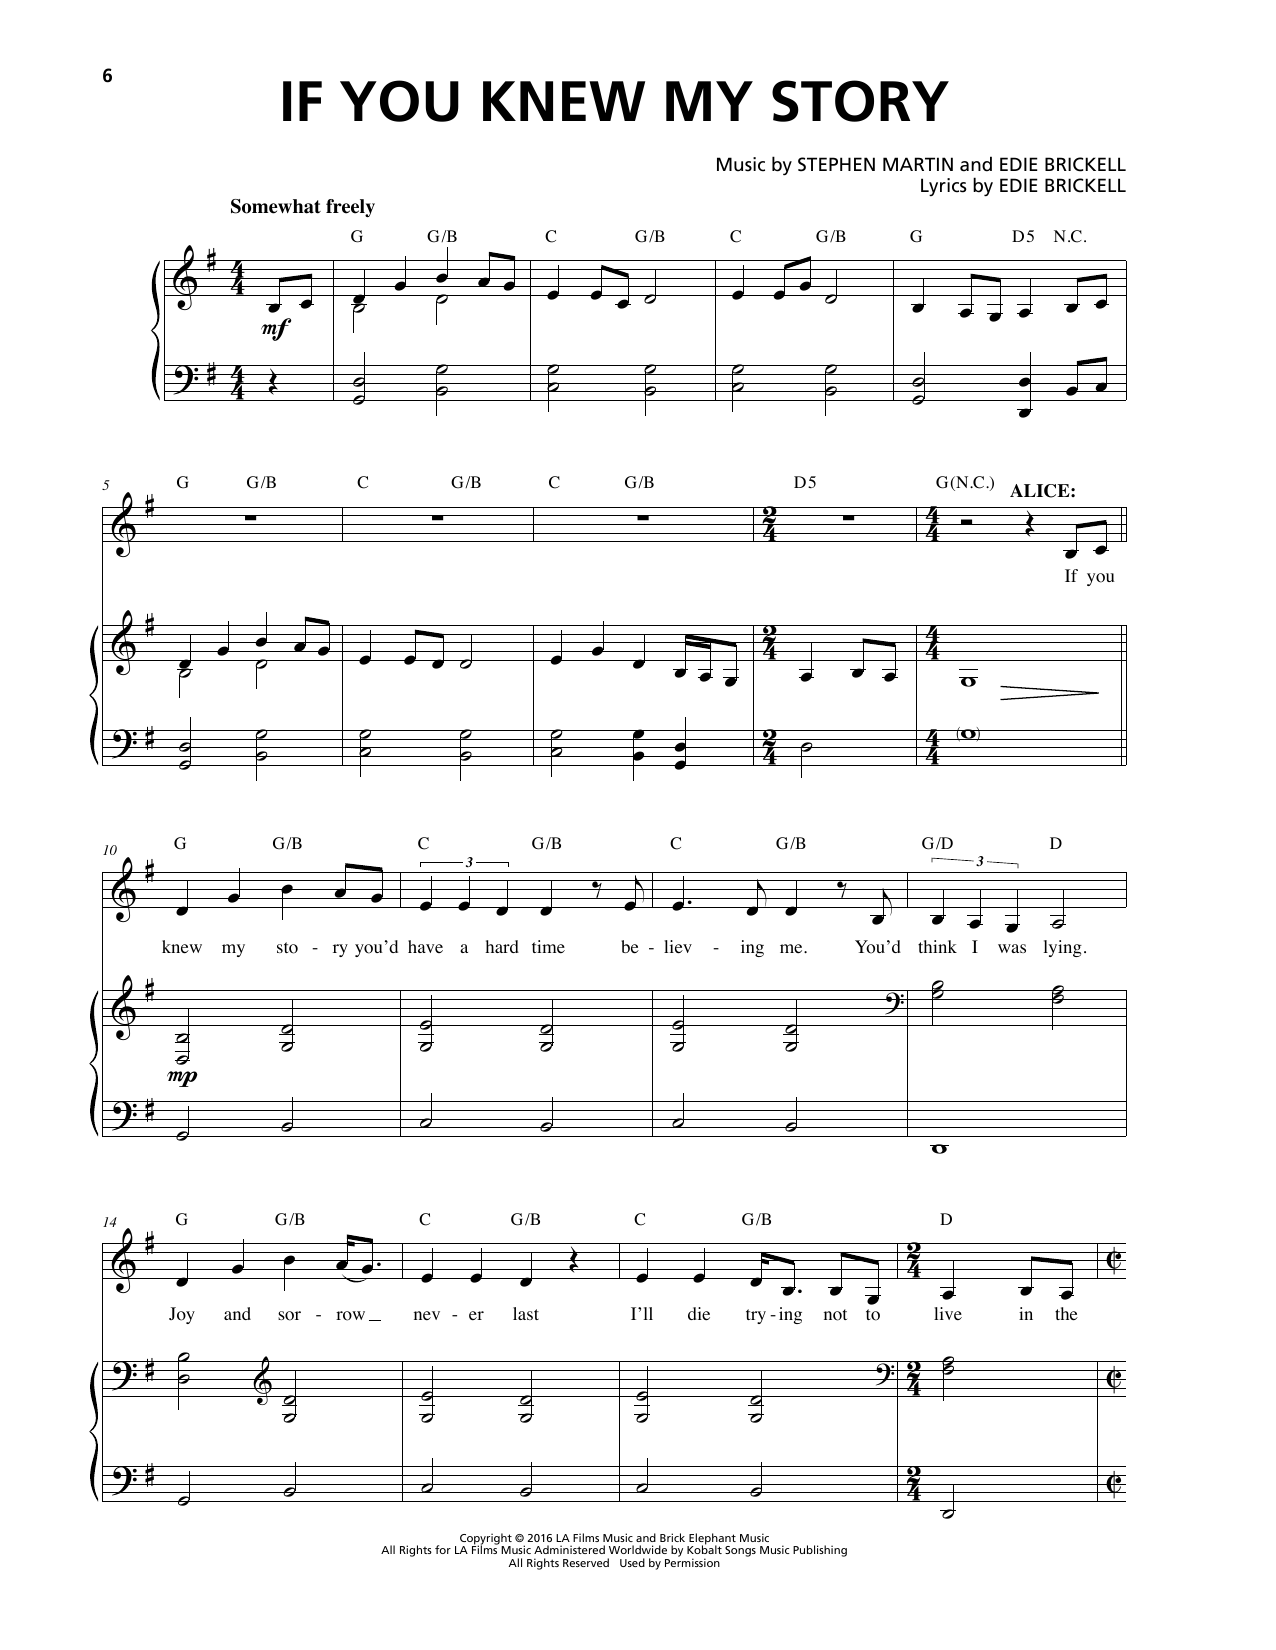 Download Stephen Martin & Edie Brickell If You Knew My Story Sheet Music